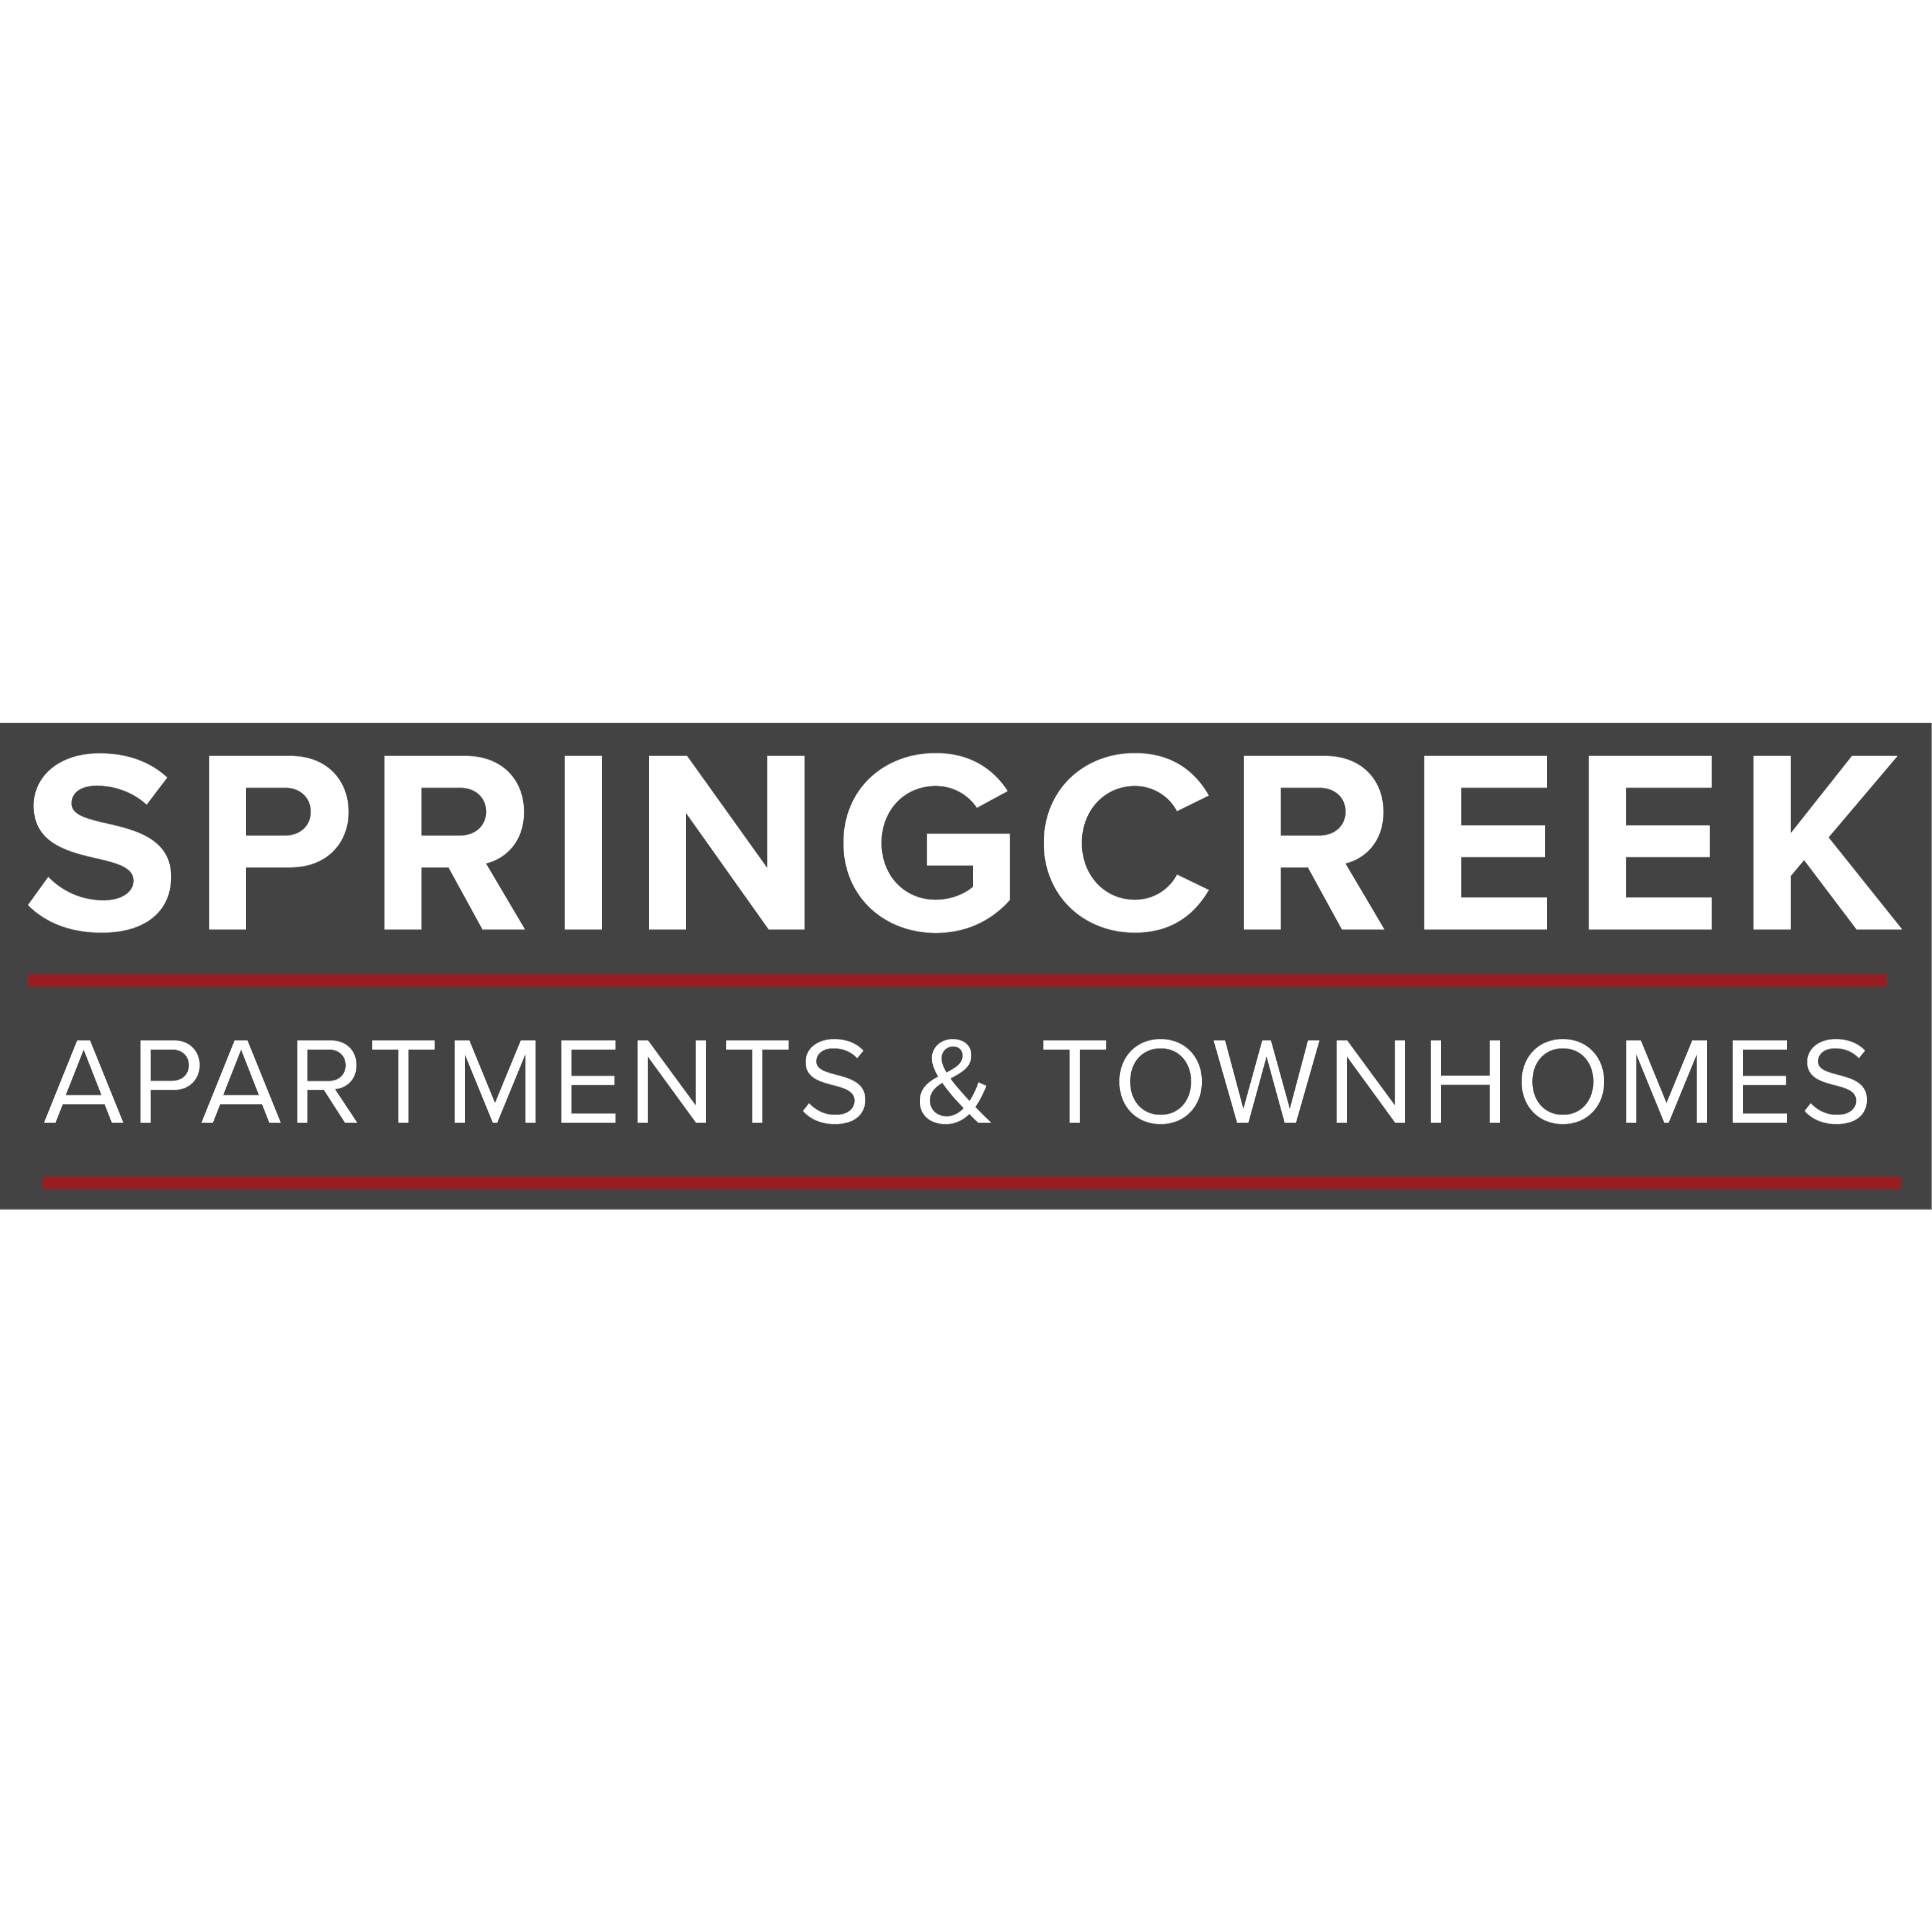 Springcreek Apartments and Townhomes